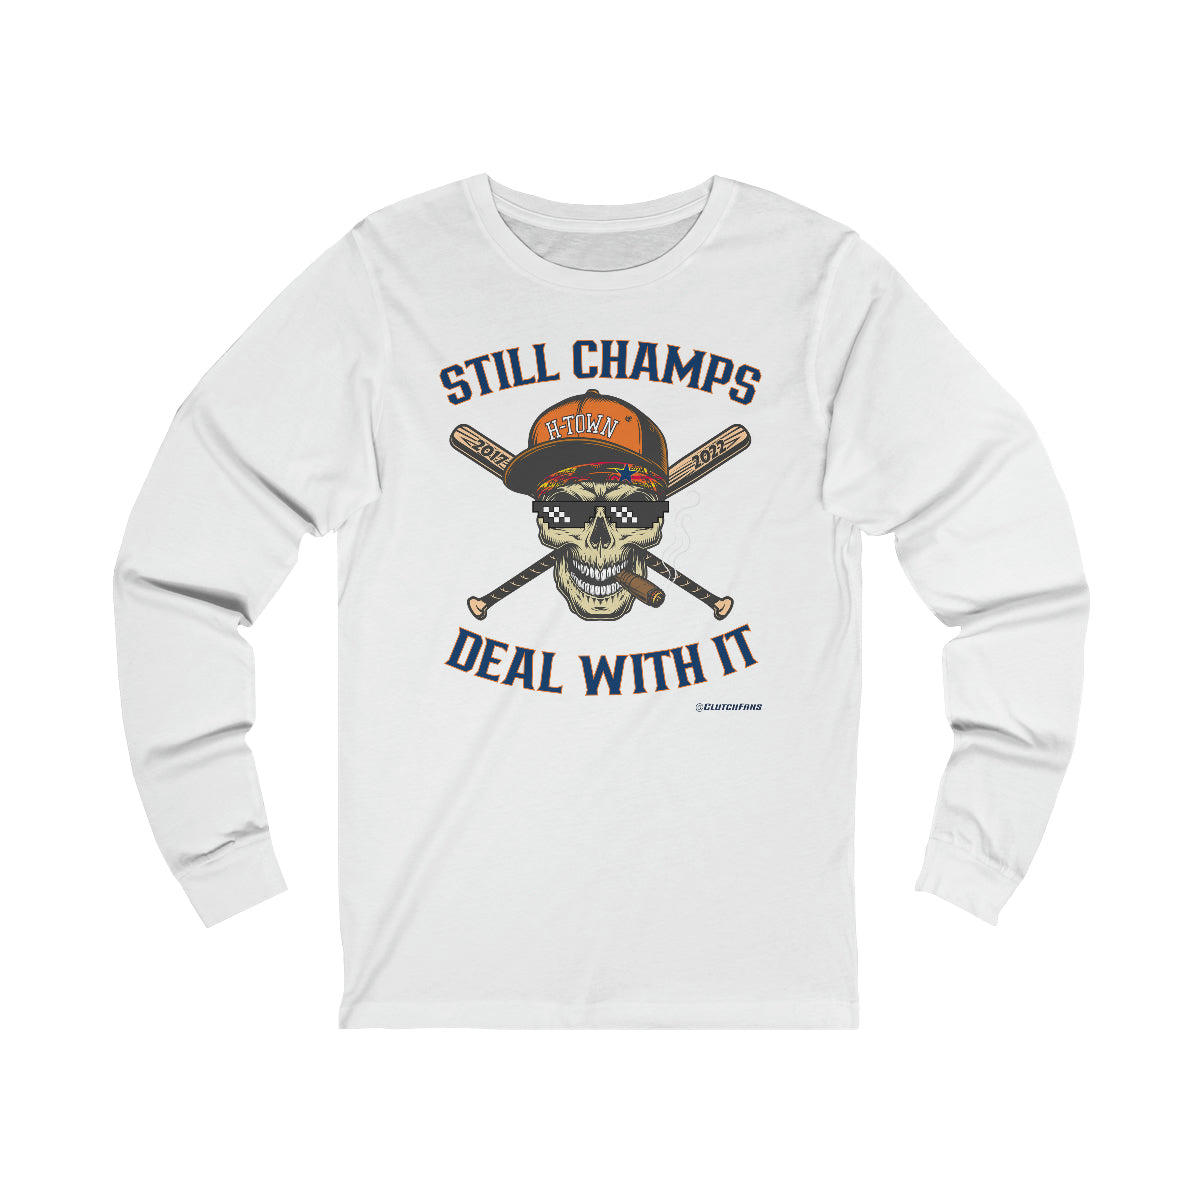 STILL CHAMPS: Deal With It! -  Long Sleeve Tee